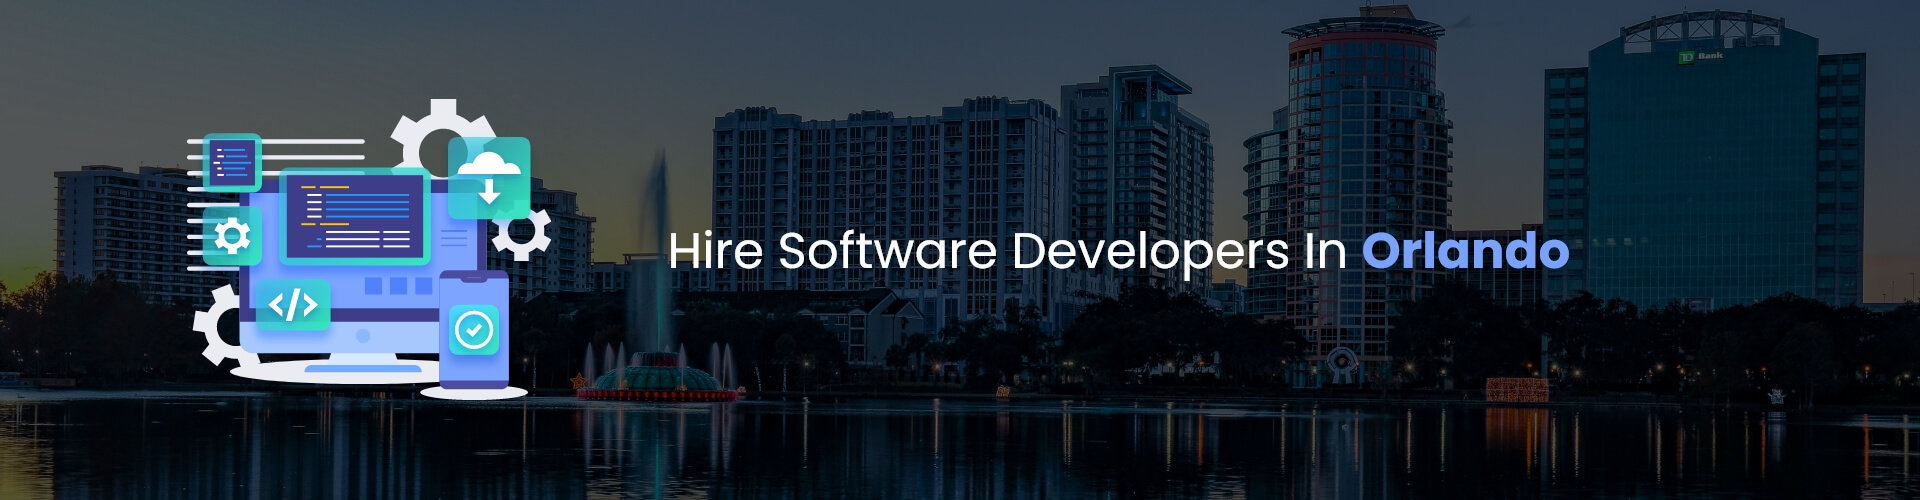 hire software developers in orlando